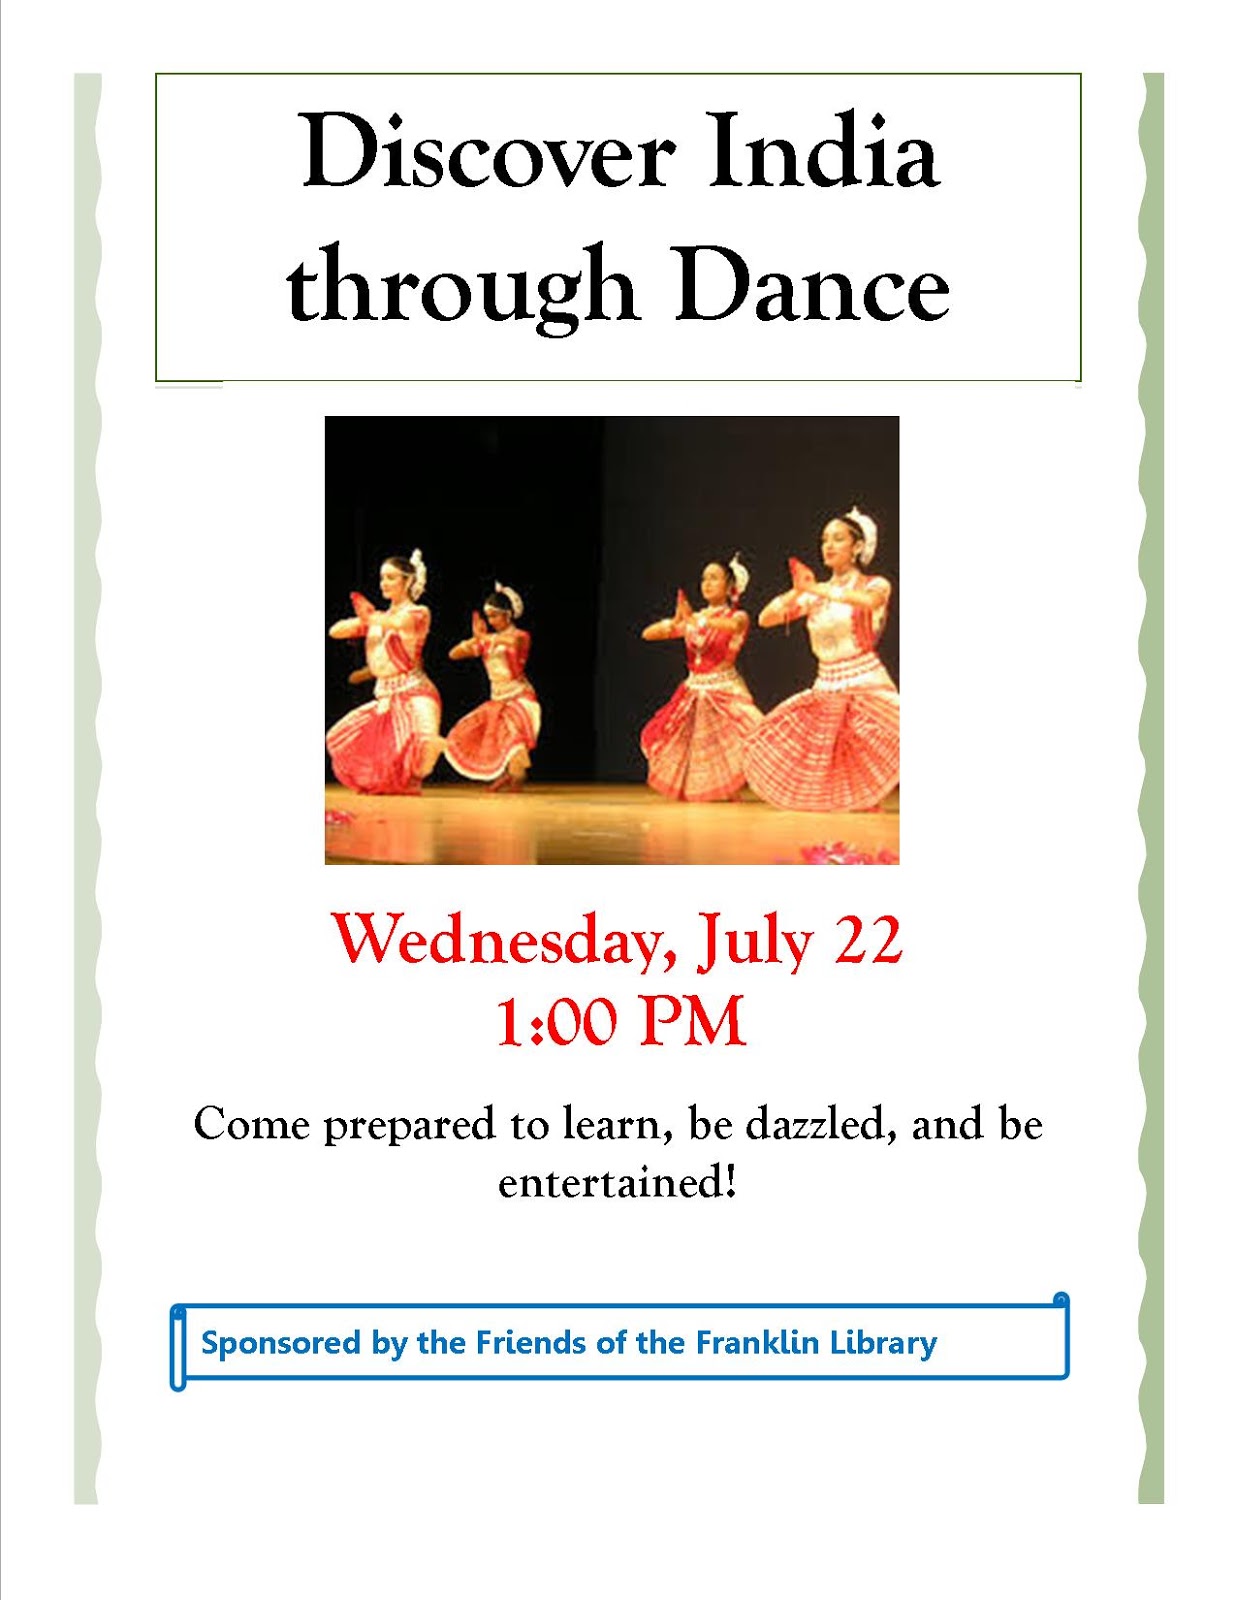 Franklin Library: Discover India through Dance